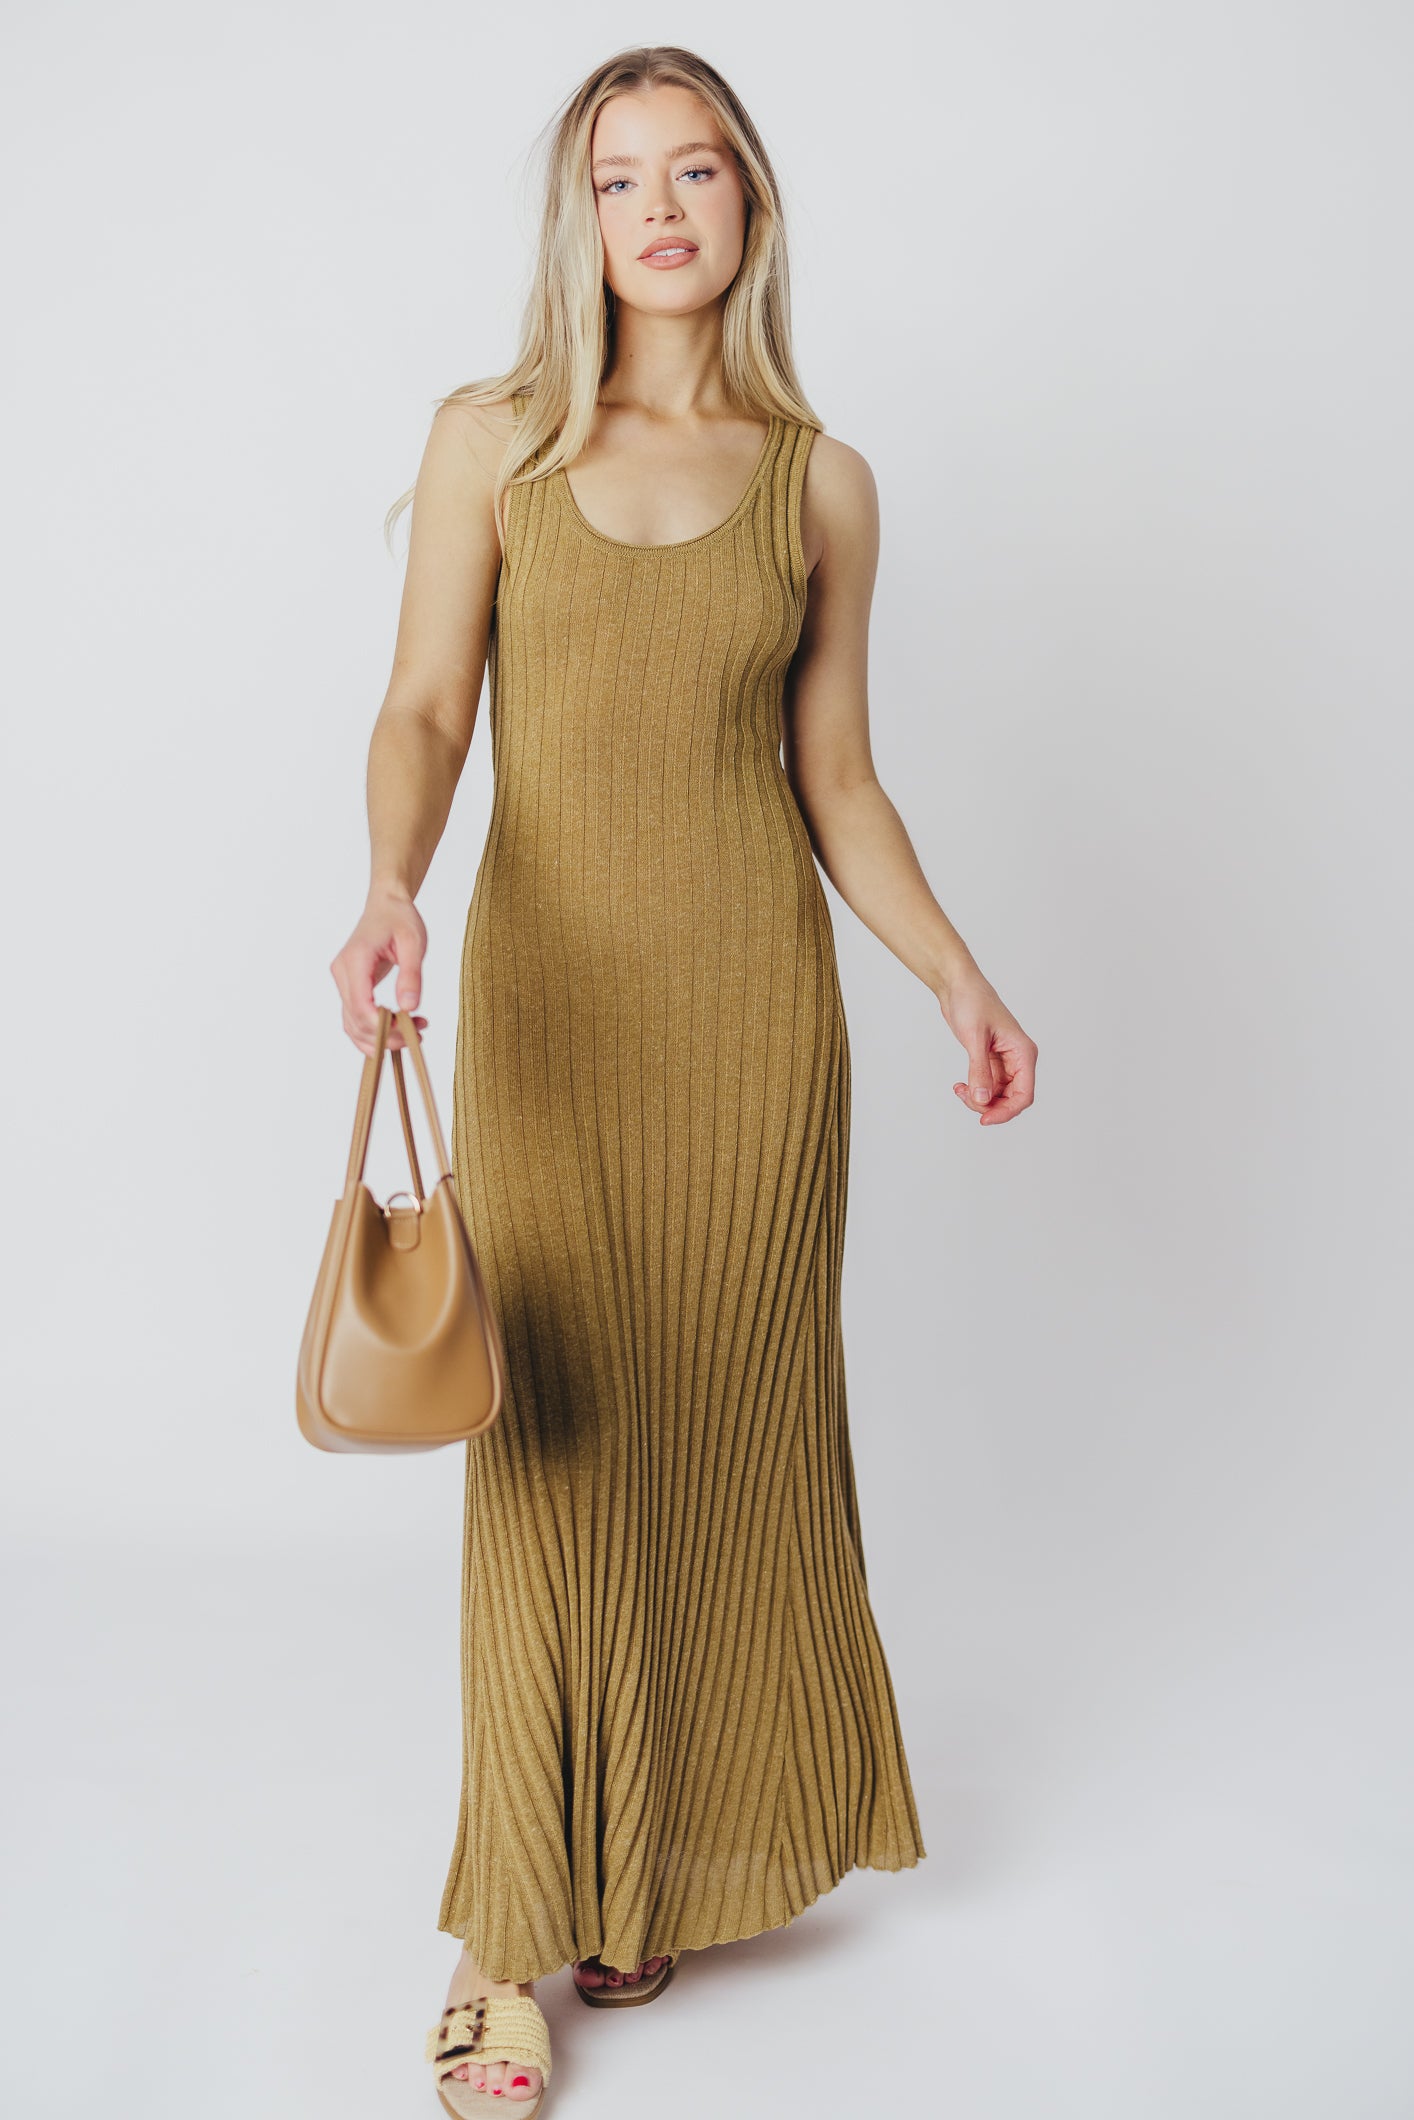 Gidea Knit Maxi Dress in Brown Olive